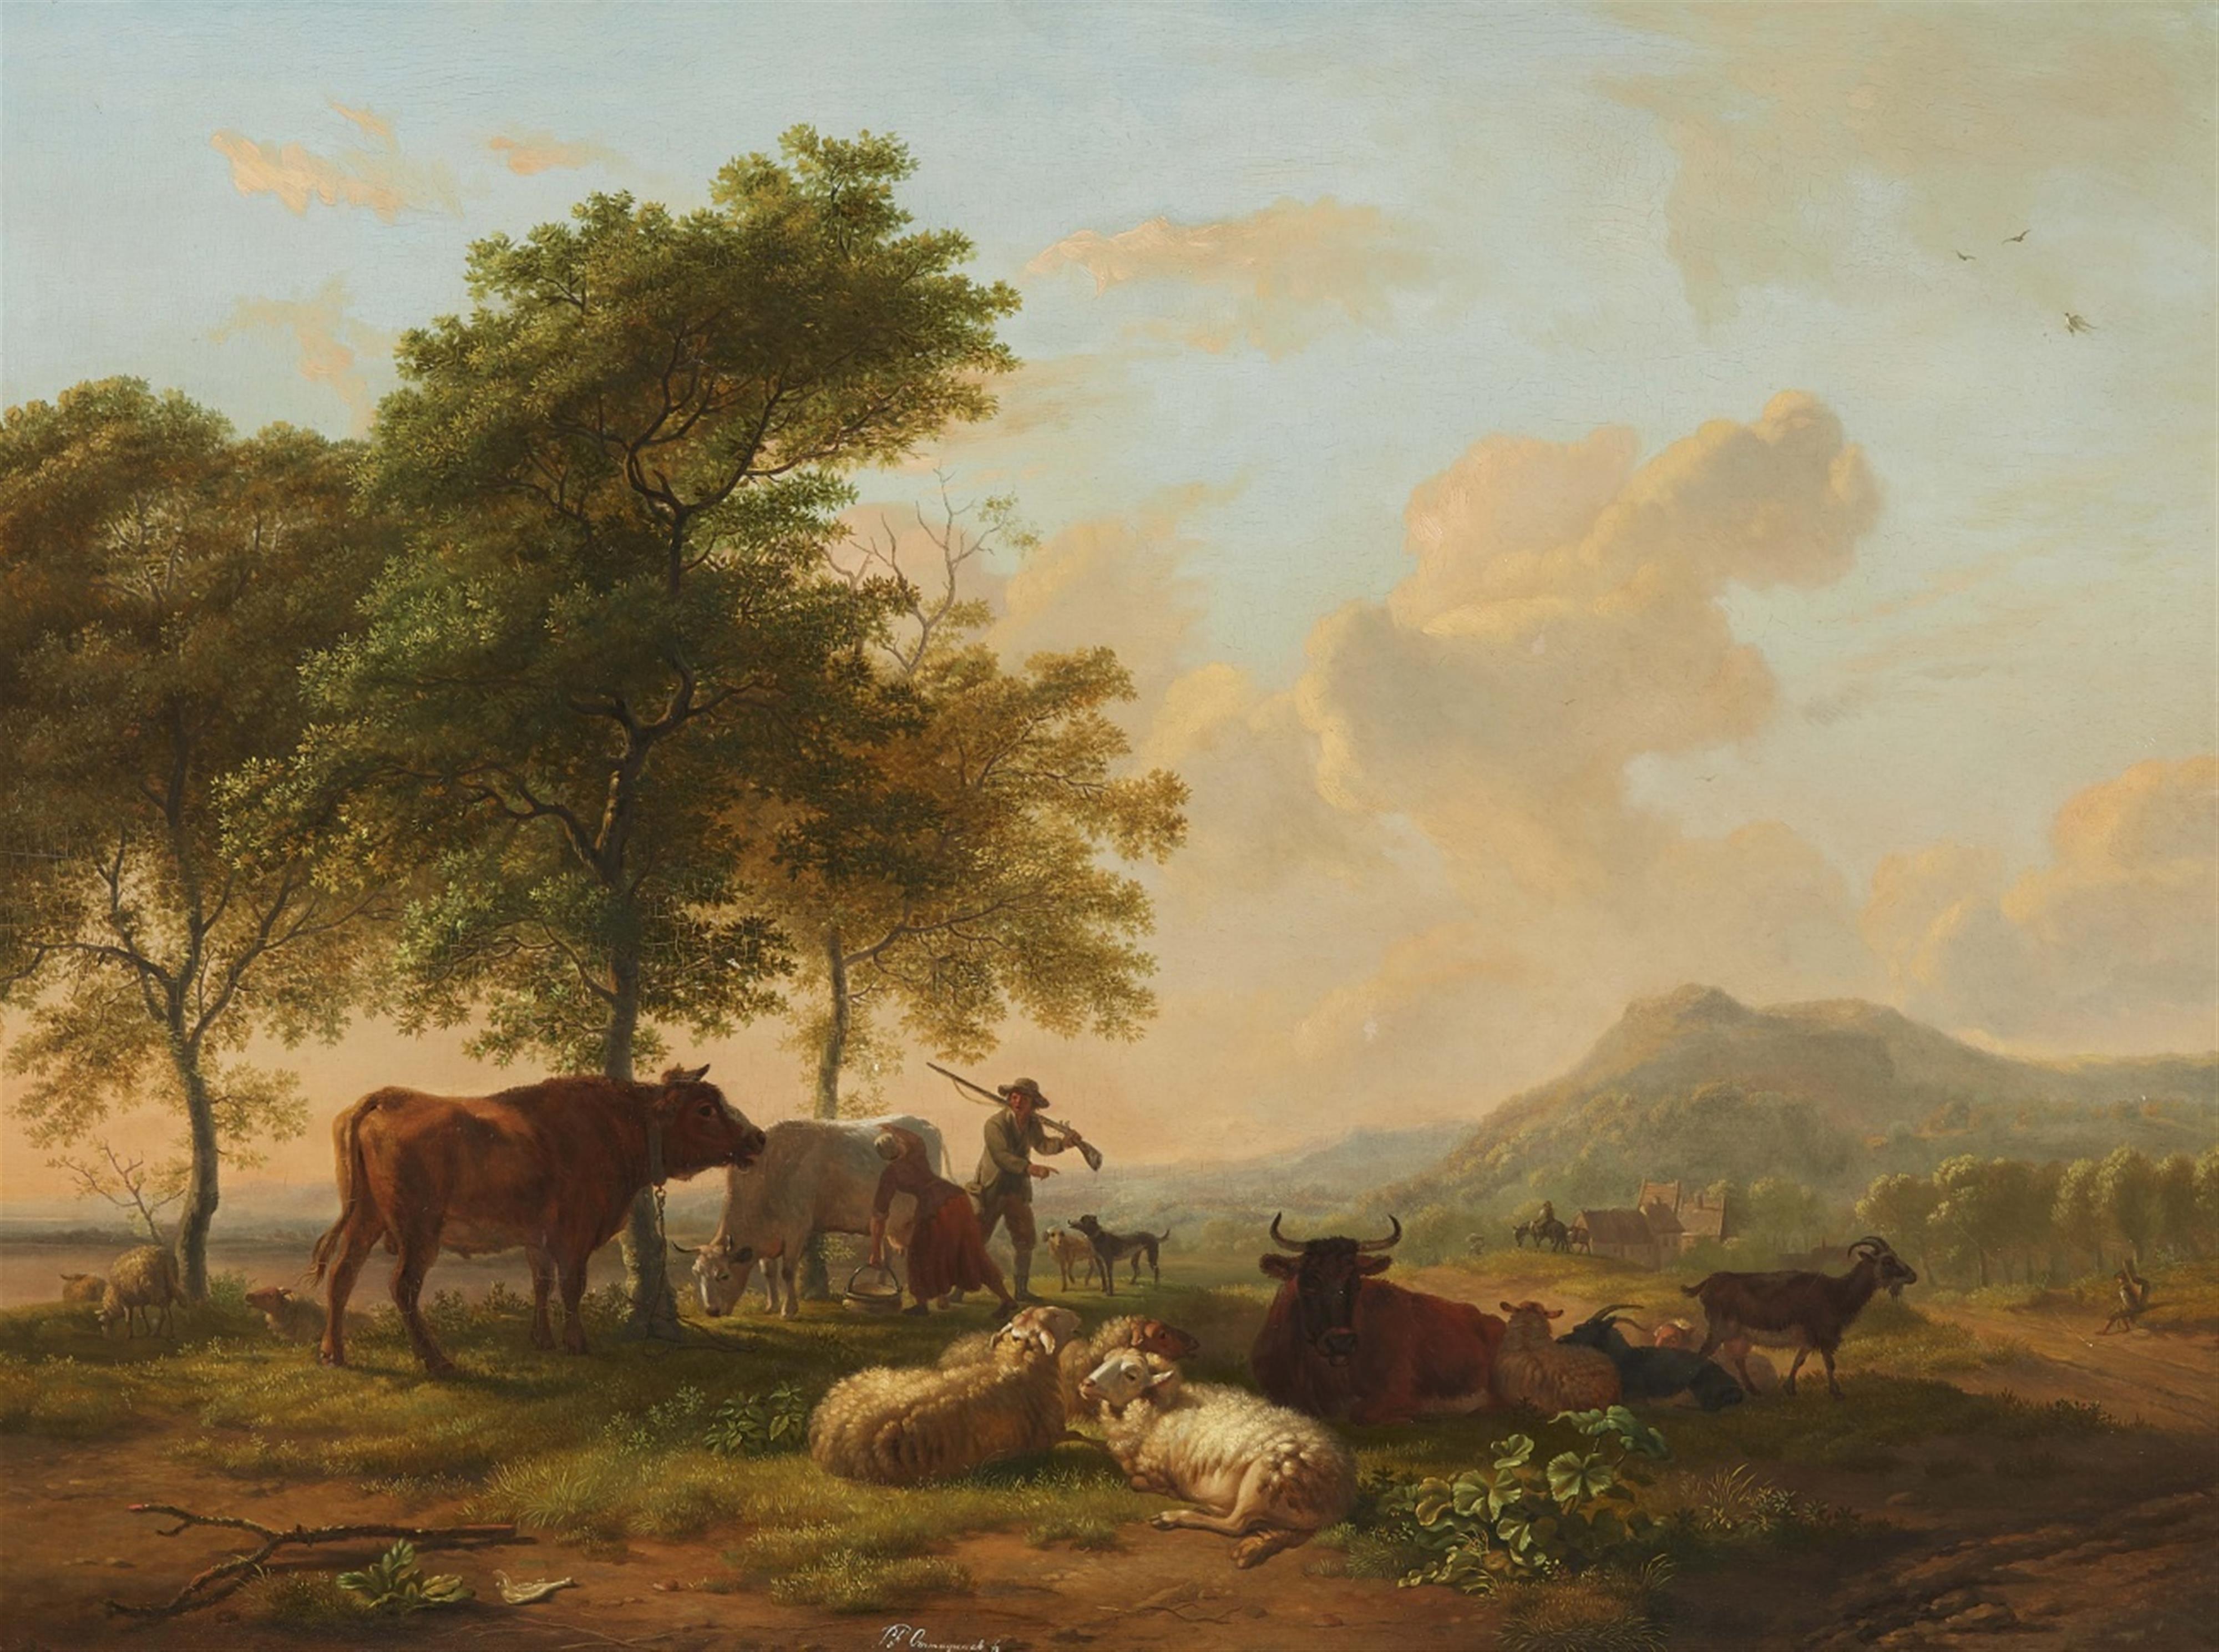 Balthasar Paul Ommeganck - Landscape with a Herd of Cattle, a Maid, and a Hunter - image-1